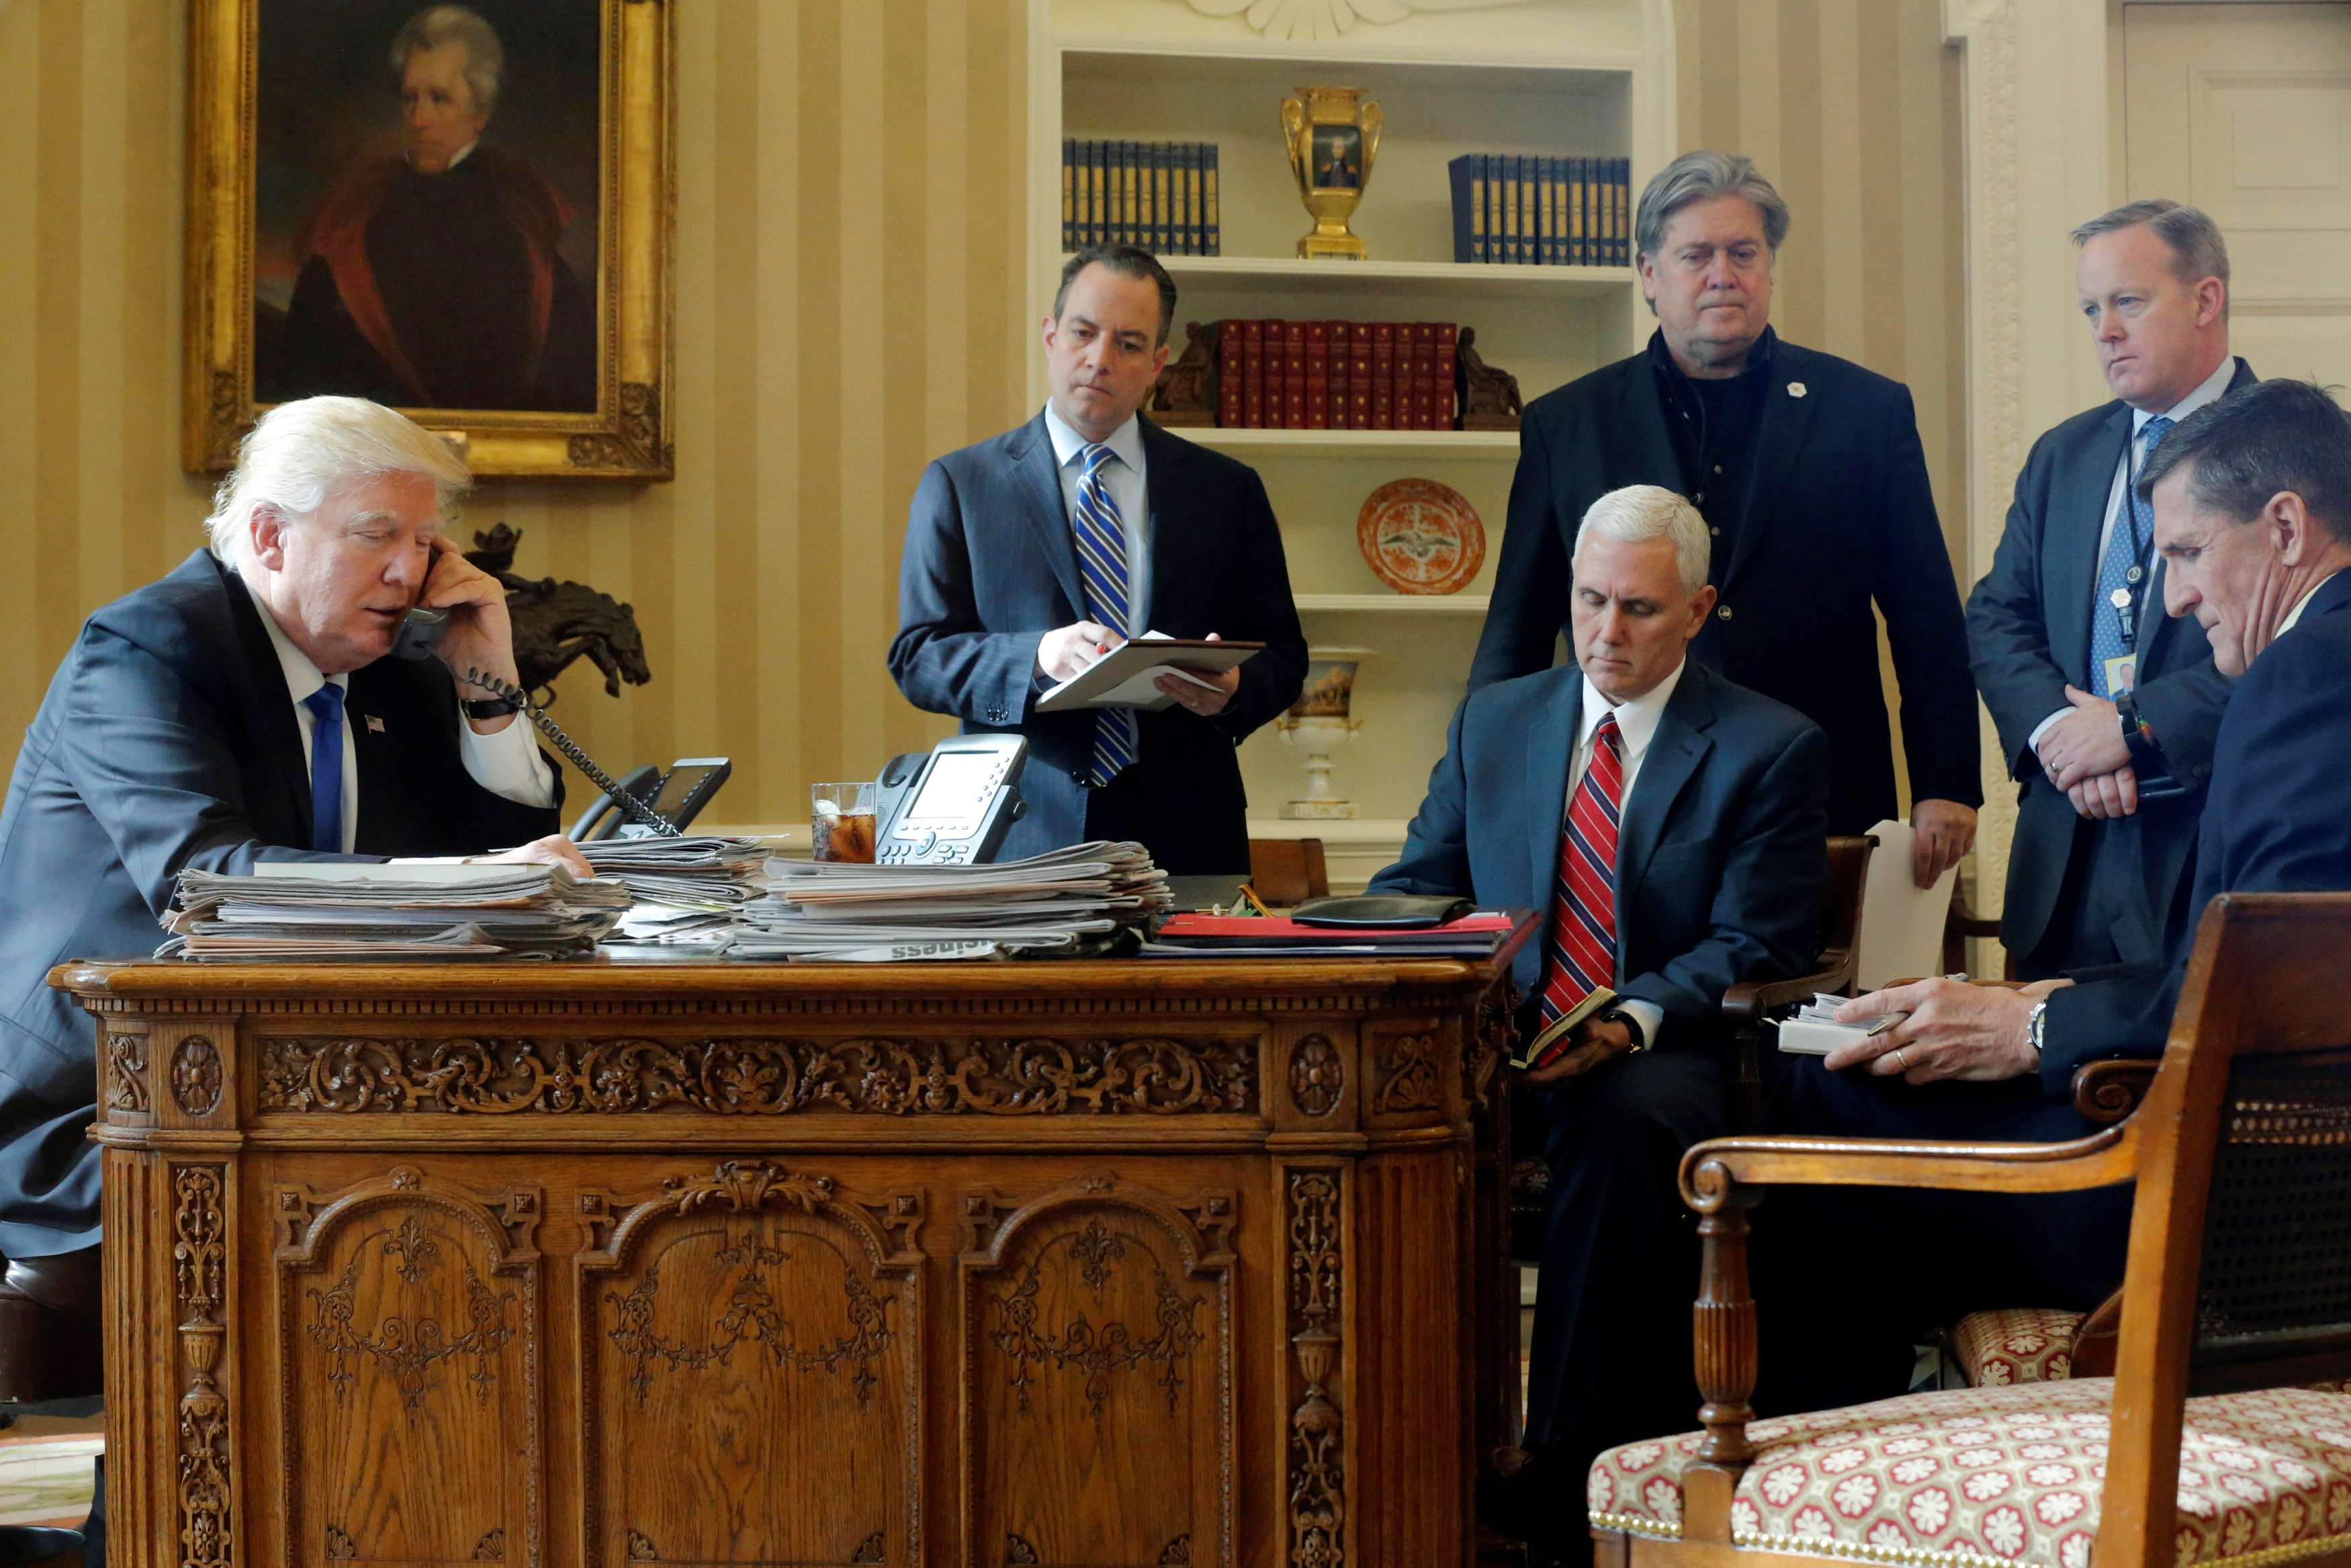 US President Donald Trump speaks on the phone with Russian President Vladimir Putin in the Oval Office, watched by his White House inner circle (left to right), Chief of Staff Reince Priebus, Vice-President Mike Pence, Chief Strategist Steve Bannon, Communications Director Sean Spicer and National Security Adviser Michael Flynn, on January 28. Photo: Reuters